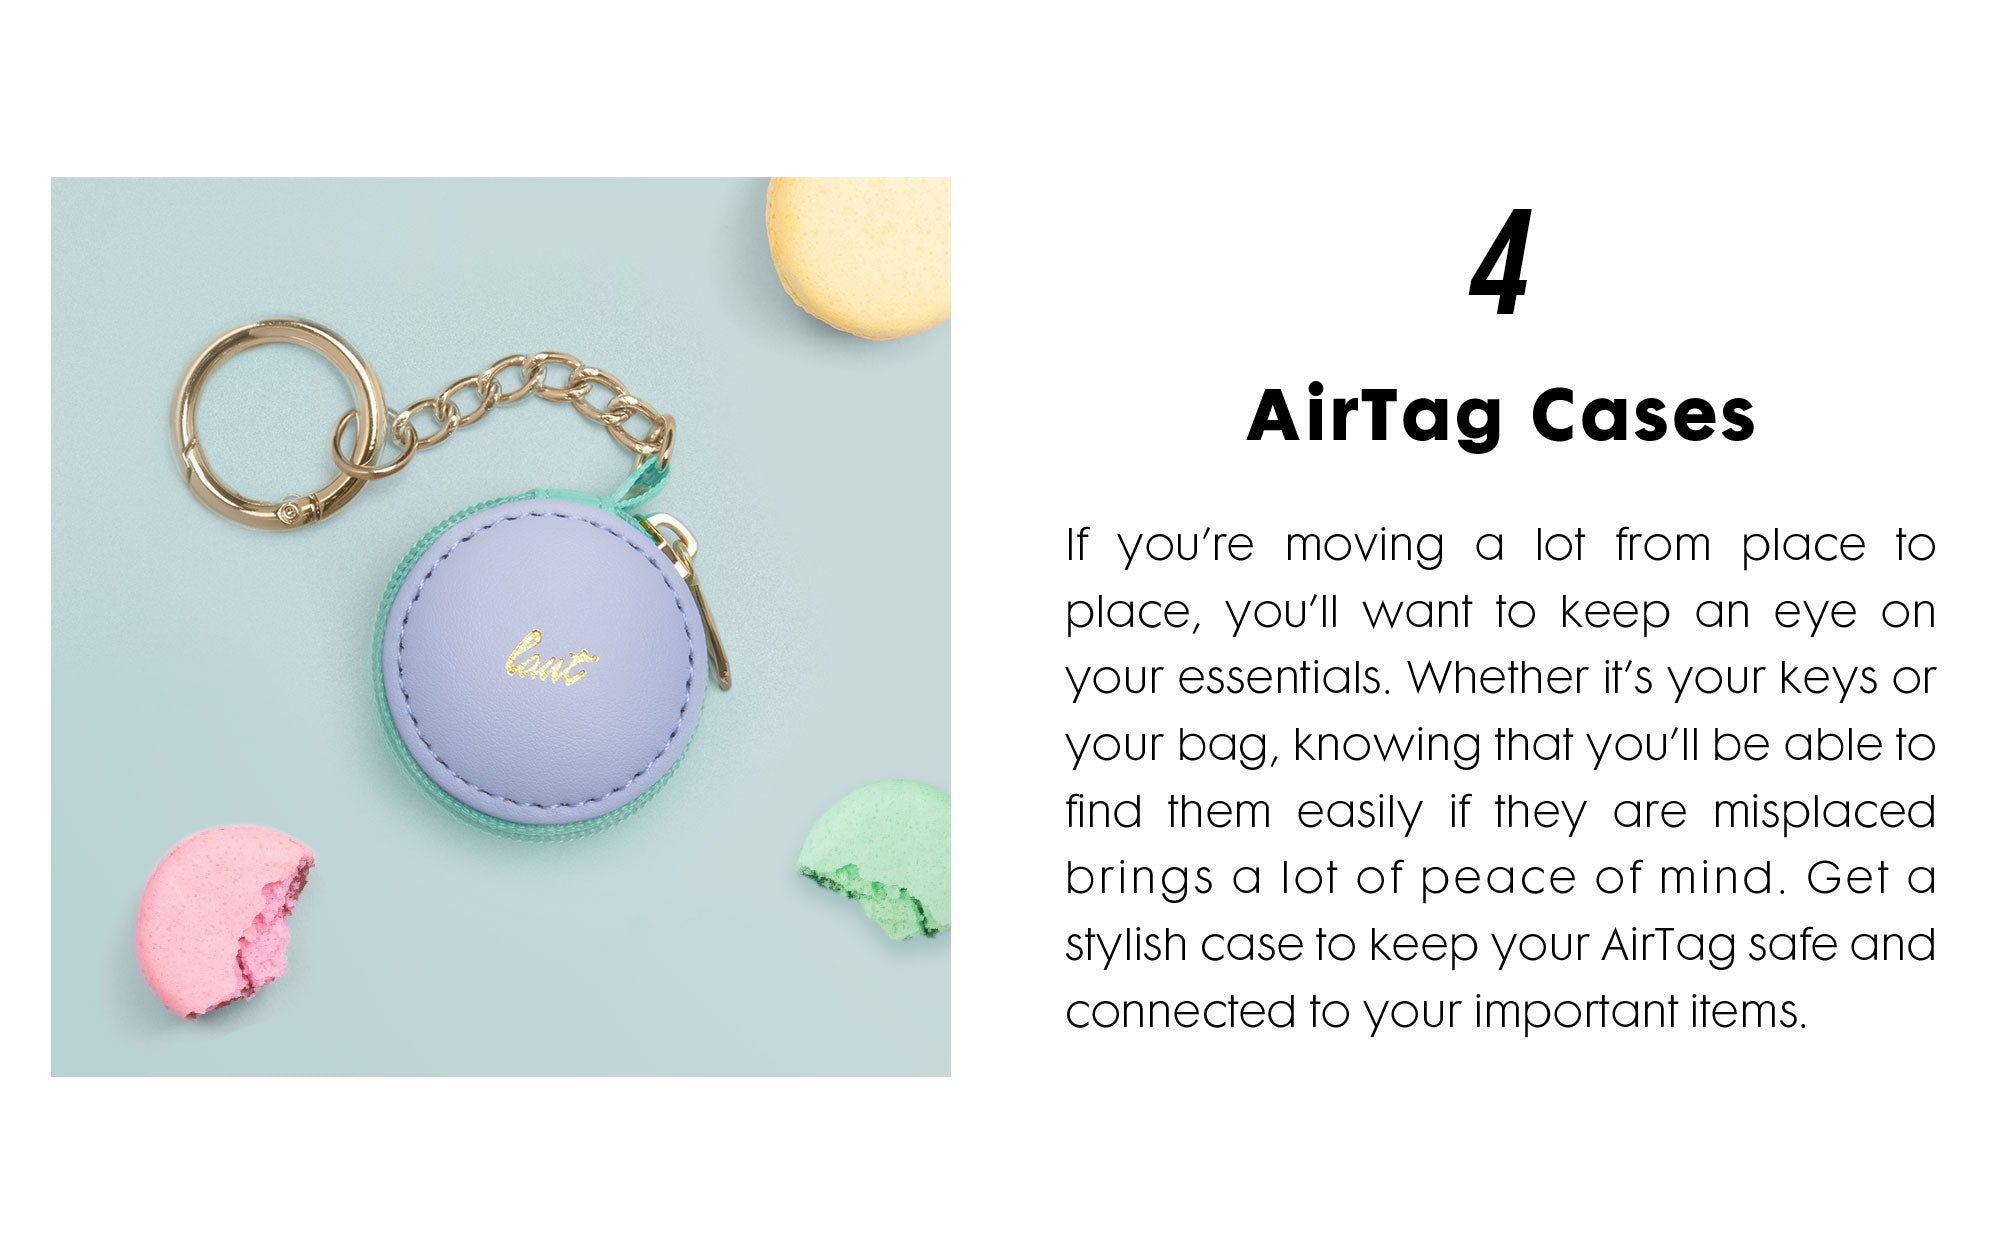 AirTag Cases - If you’re moving a lot from place to place, you’ll want to keep an eye on your essentials. Whether it’s your keys or your bag, knowing that you’ll be able to find them easily if they are misplaced brings a lot of peace of mind. Get a stylish case to keep your AirTag safe and connected to your important items. 